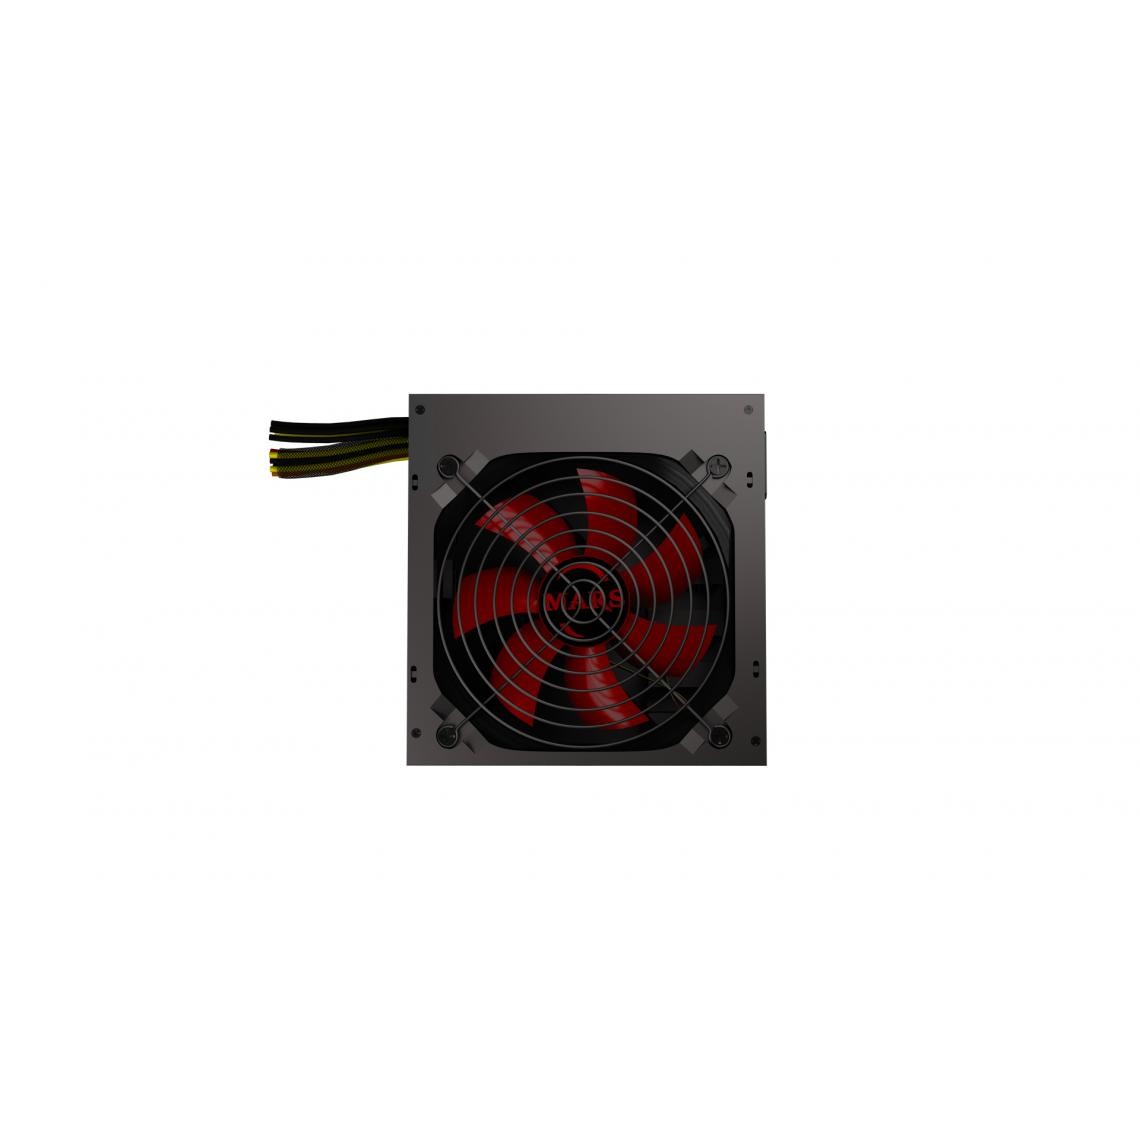 Mars Gaming - Alimentation ATX MPII 850W (Noir/Rouge) - Alimentation modulaire